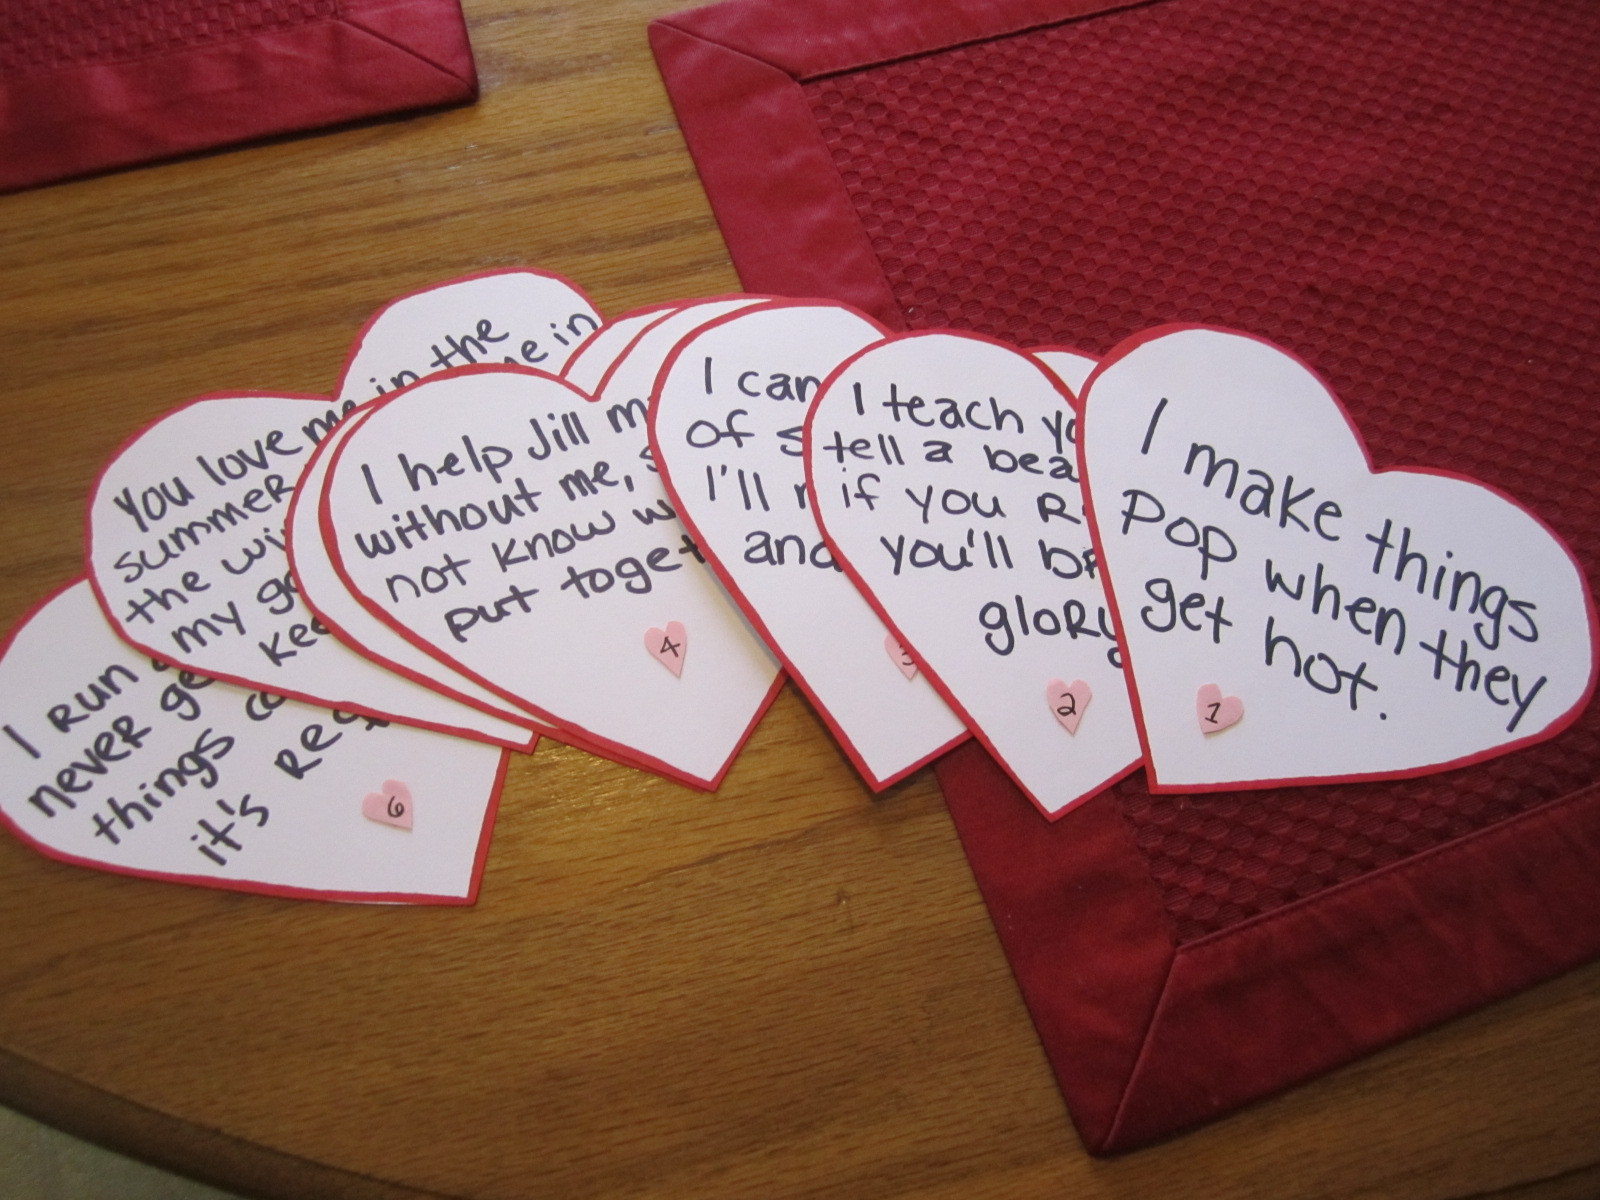 Creative Valentines Day Ideas For Her
 Ten DIY Valentine’s Day Gifts for him and her